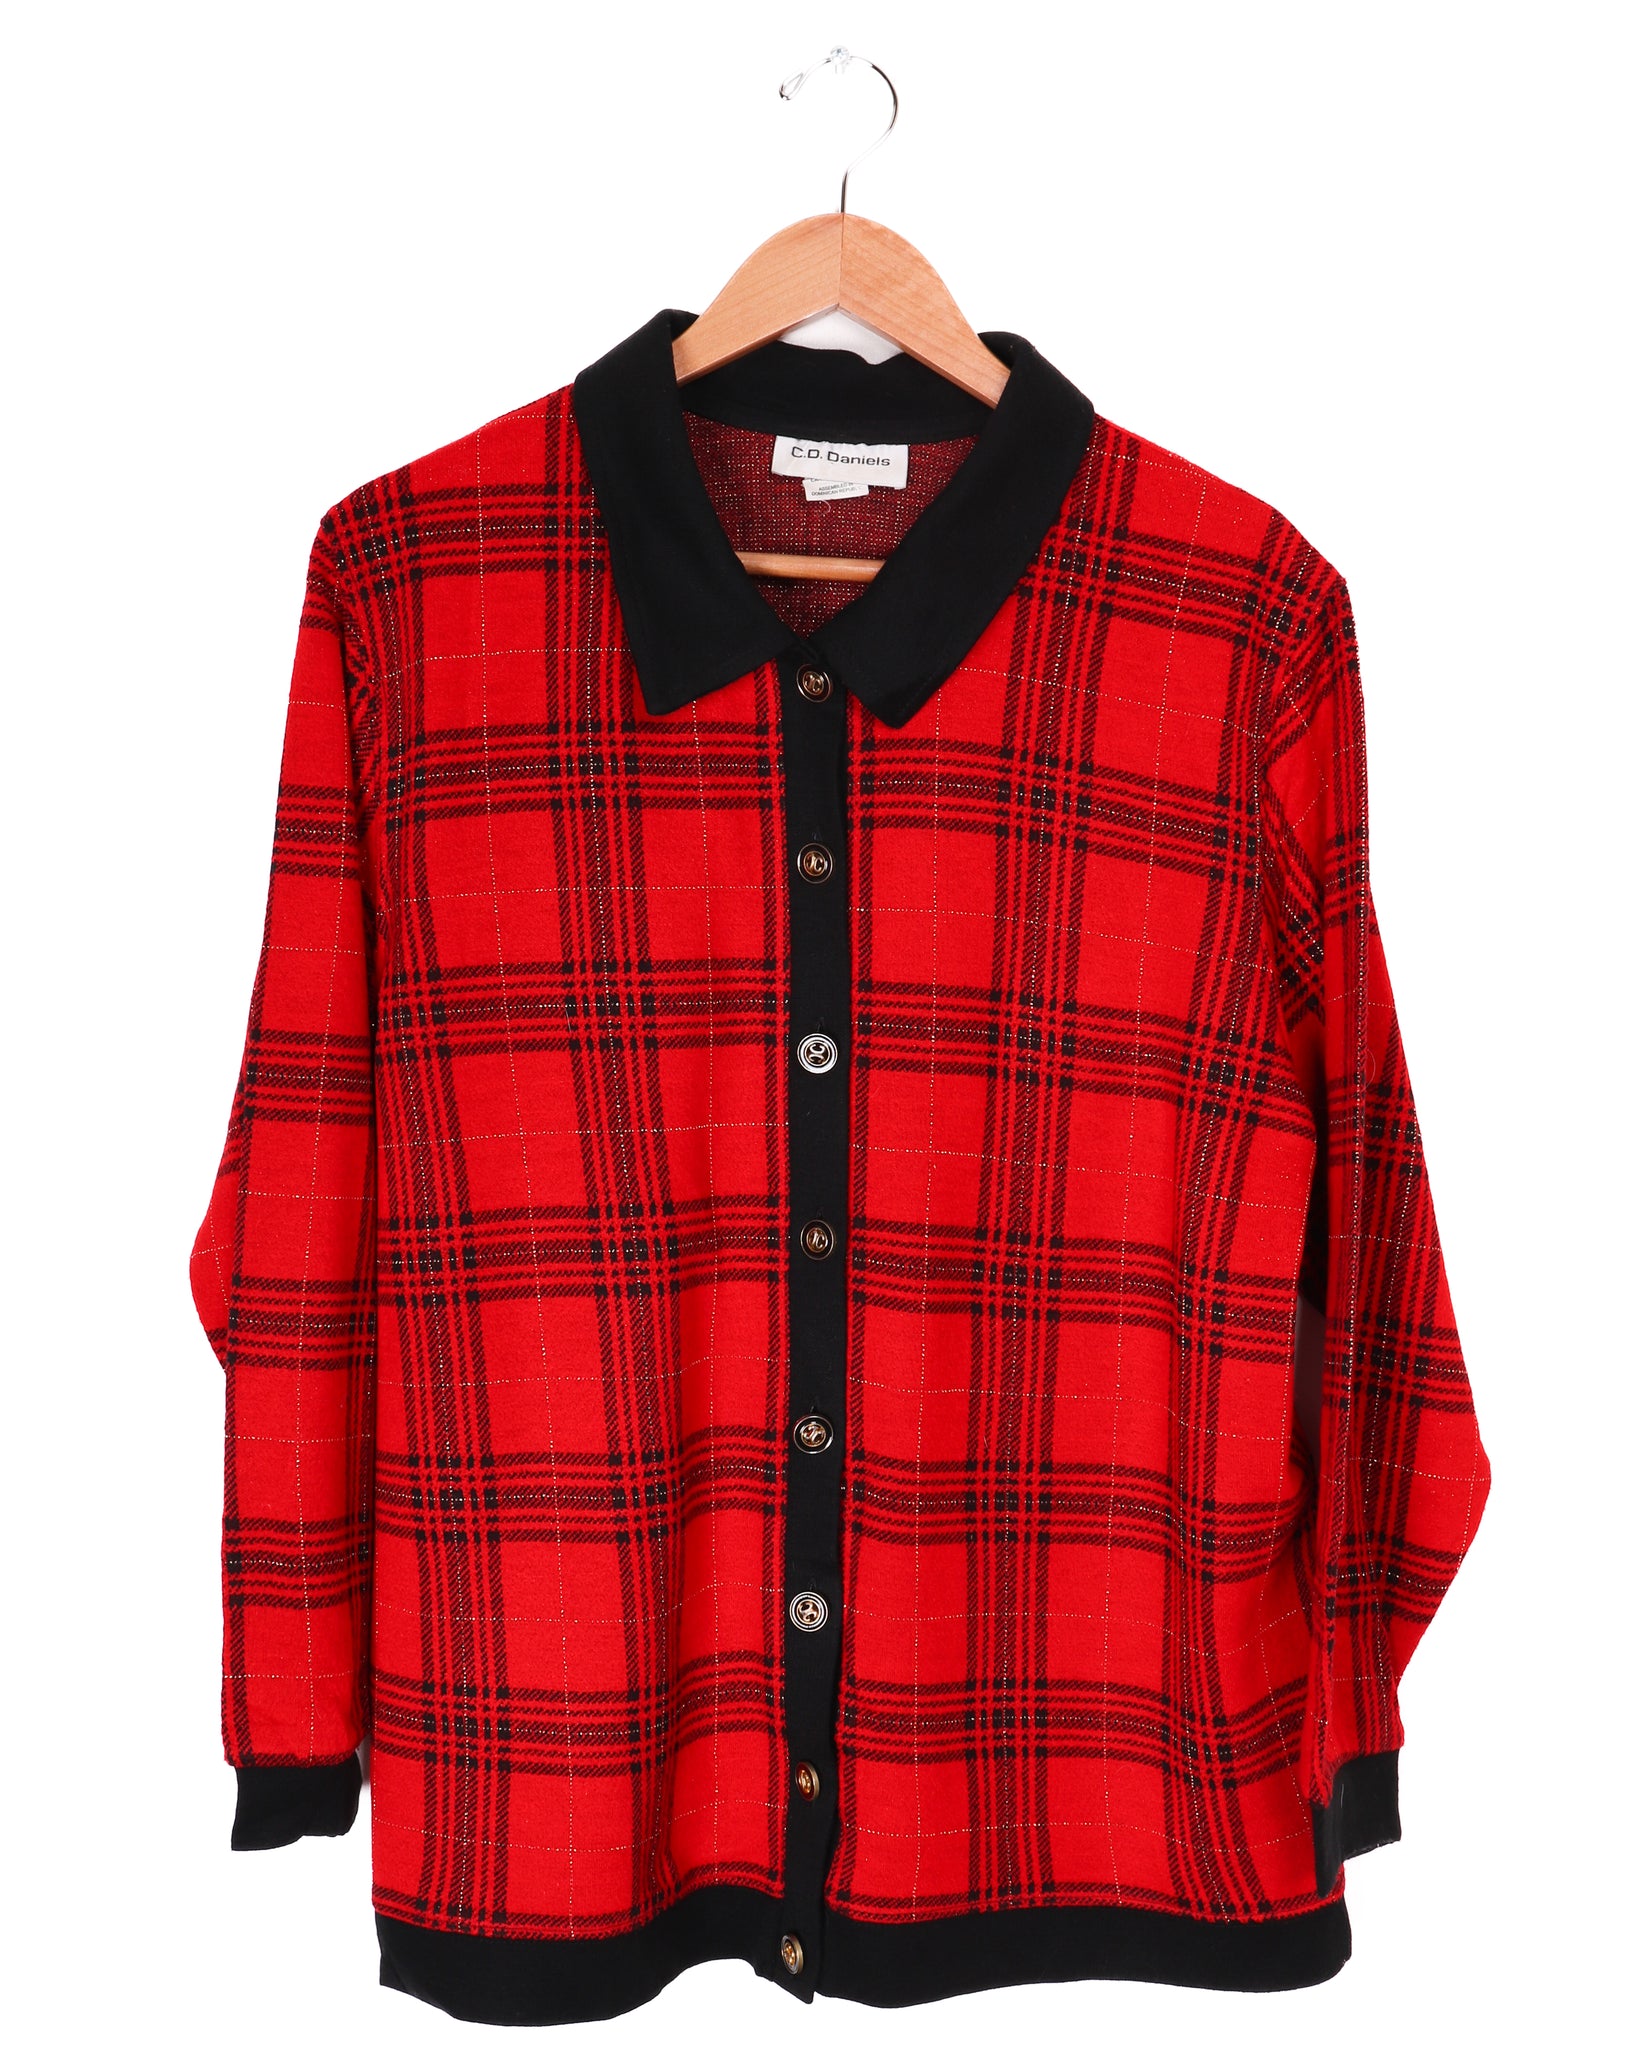 C.D. Daniels Holiday Red Plaid Button Up Sweater Top